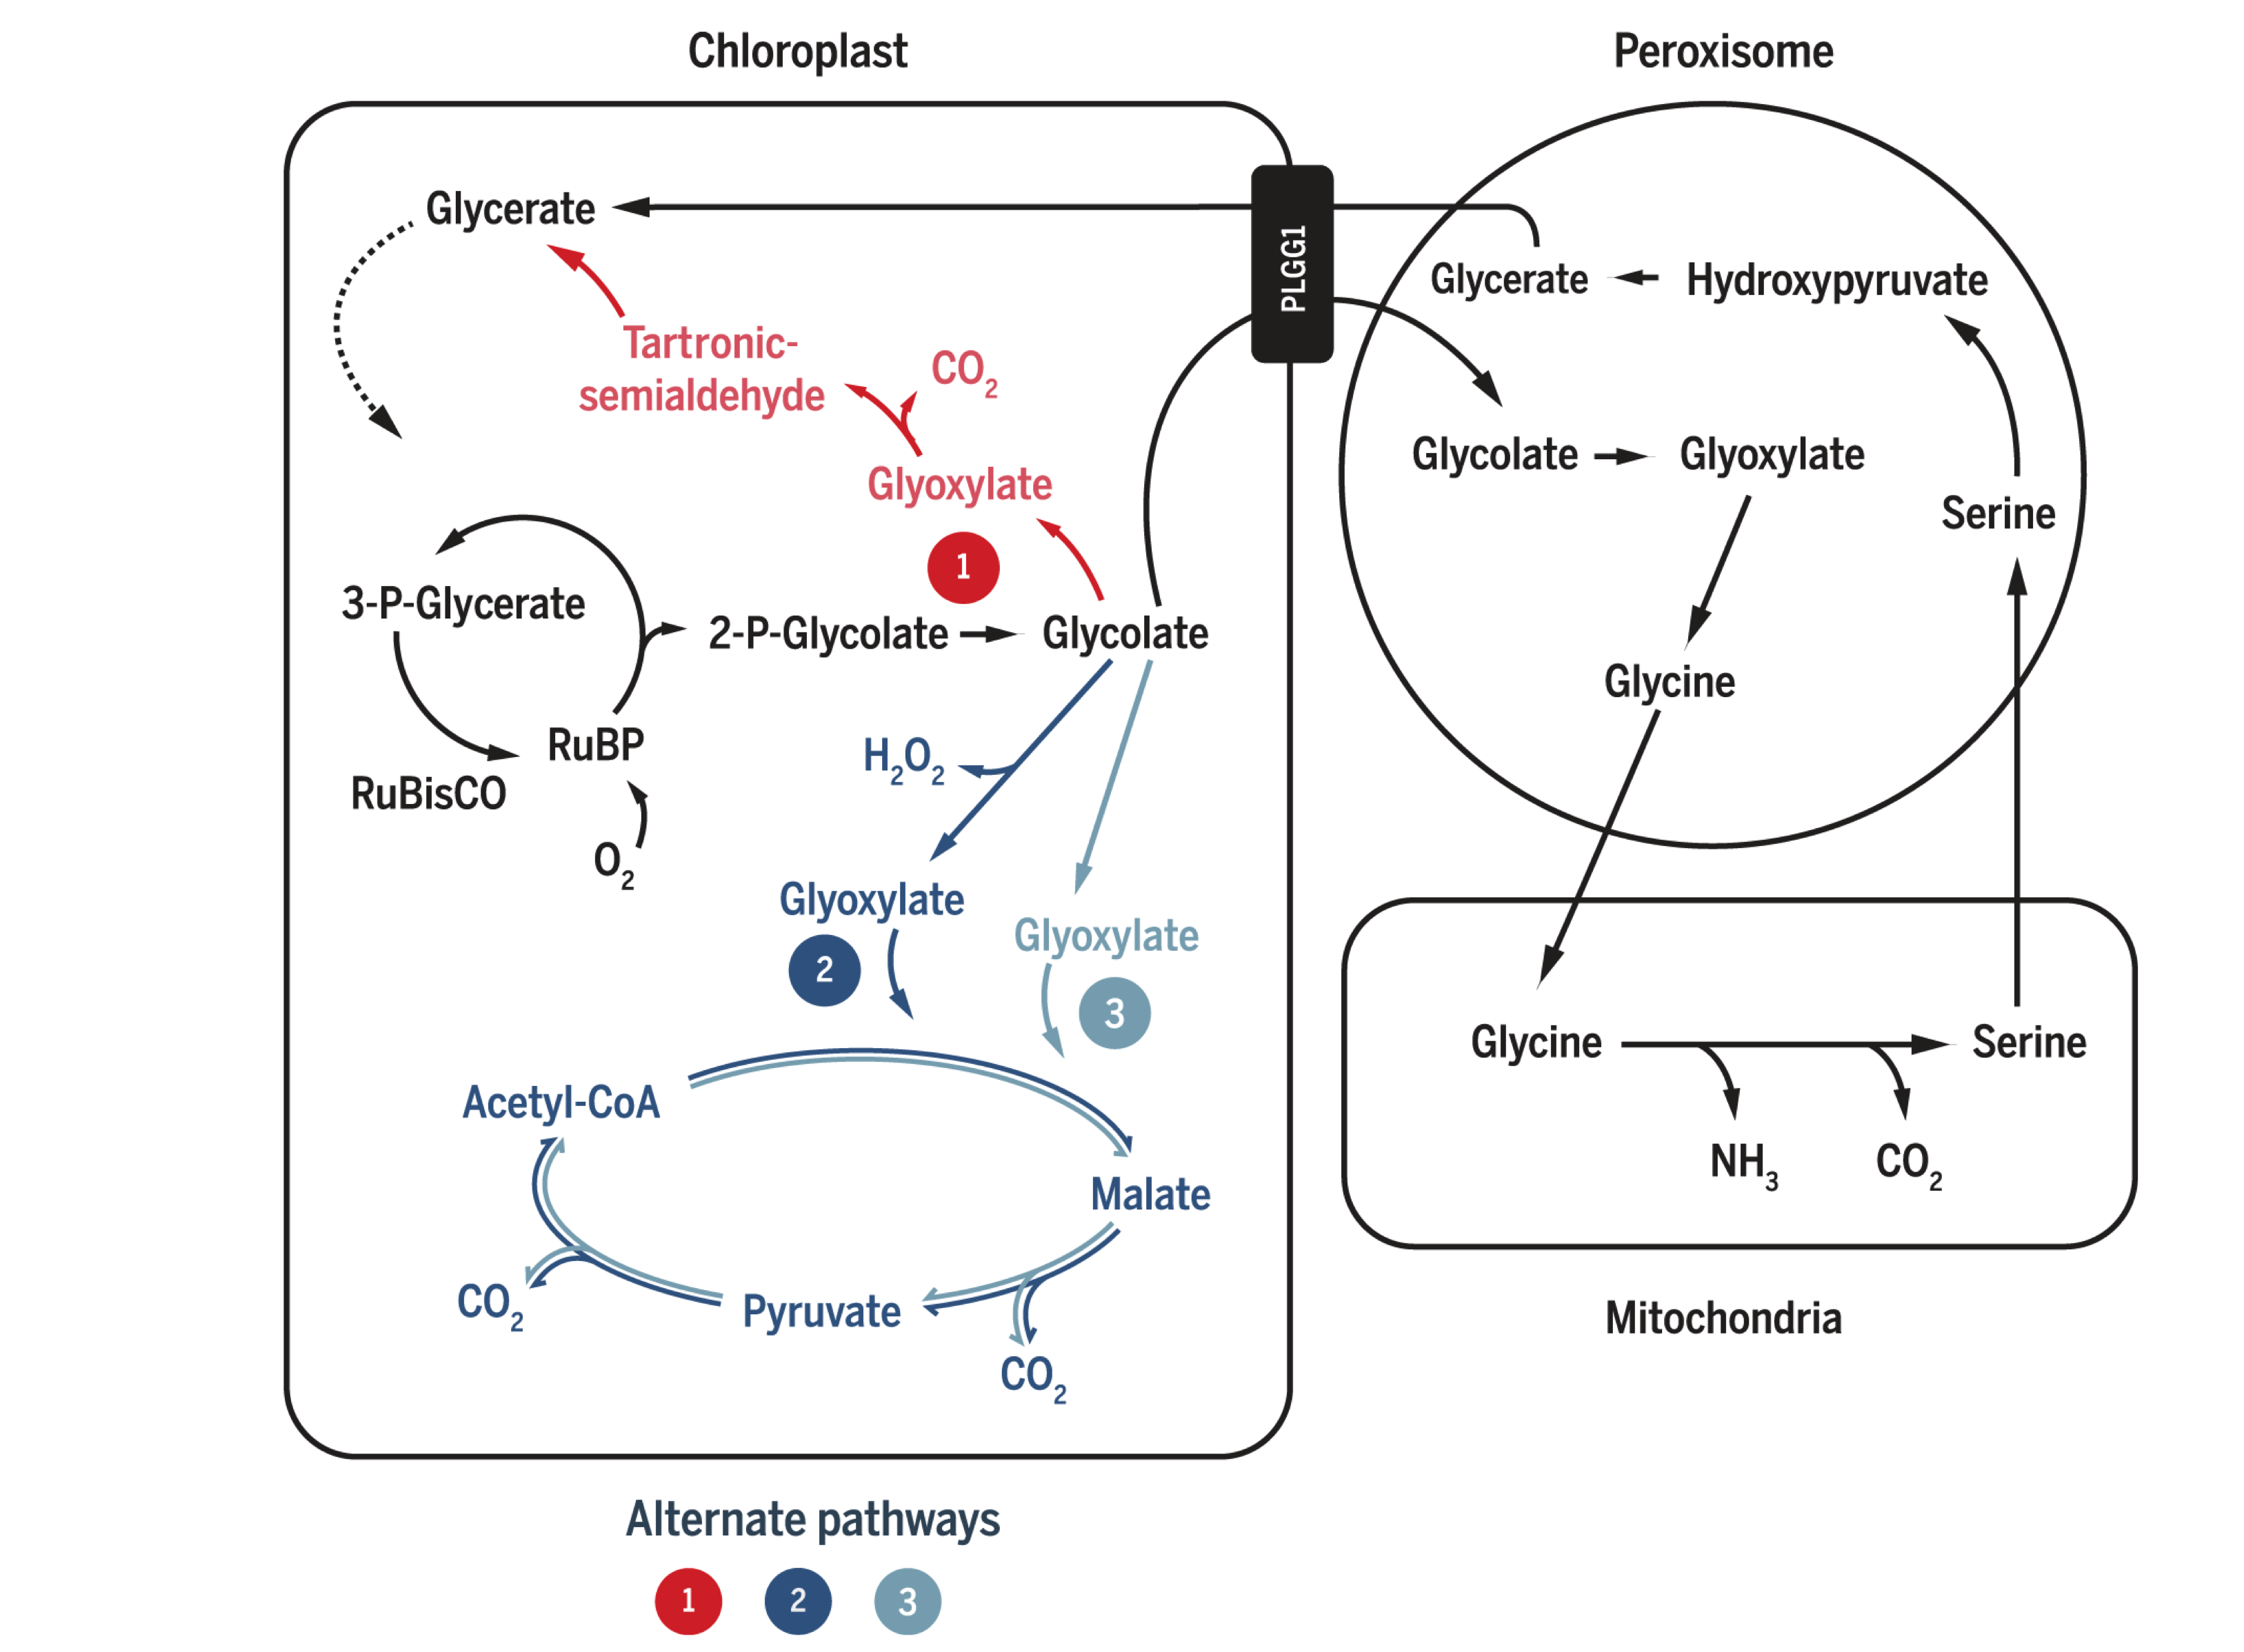 South's (2019) three photorespiratory bypass constructs. AP1: five bacterial genes encoding glycolate dehydrogenase (GDH), glyoxylate carboligase and tartronic semialdehyde reductase (same as Kebeish (2007)); AP2: glycolate oxidase (GOX), malate synthase and catalase (CAT) (same as Maier (2012)); AP3: same as AP2, except that GOX+CAT is replaced by GDH.